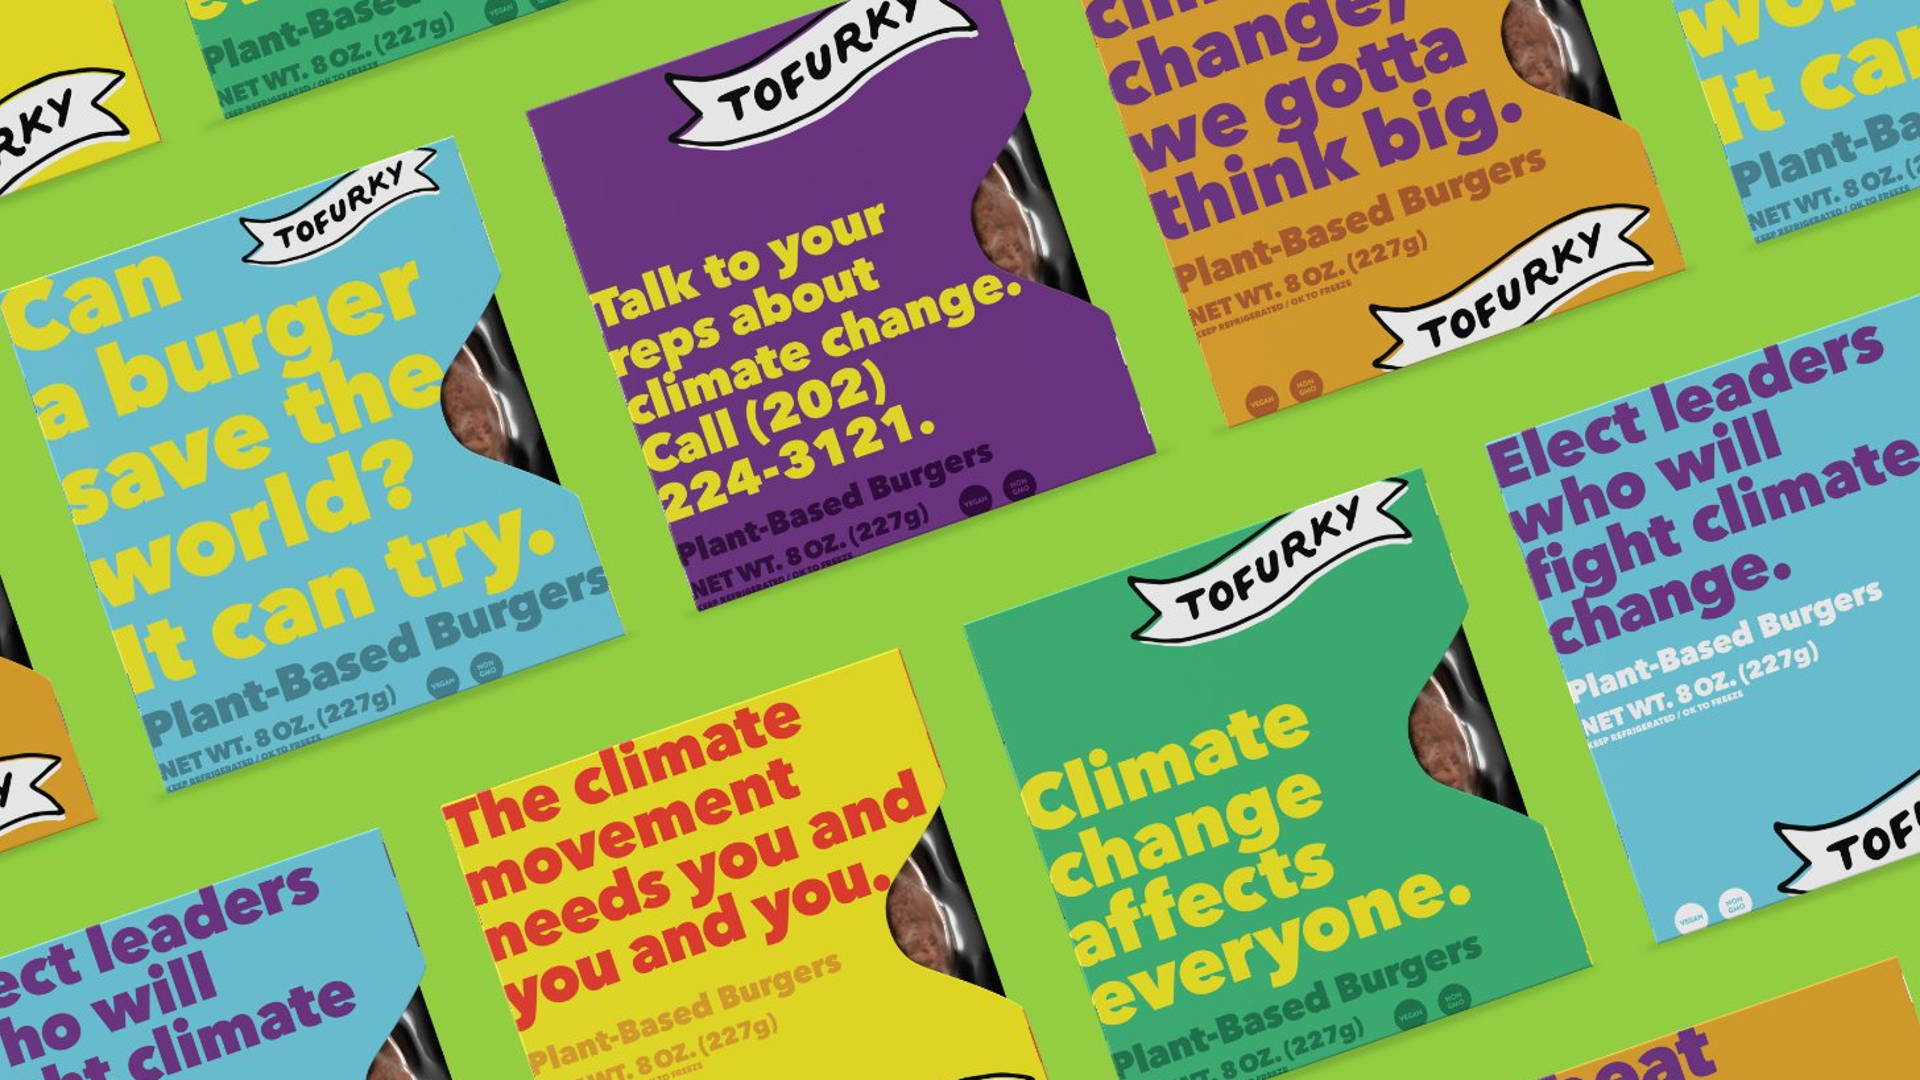 Featured image for New Tofurky Packaging Puts Climate Change Plea For Action Front-And-Center